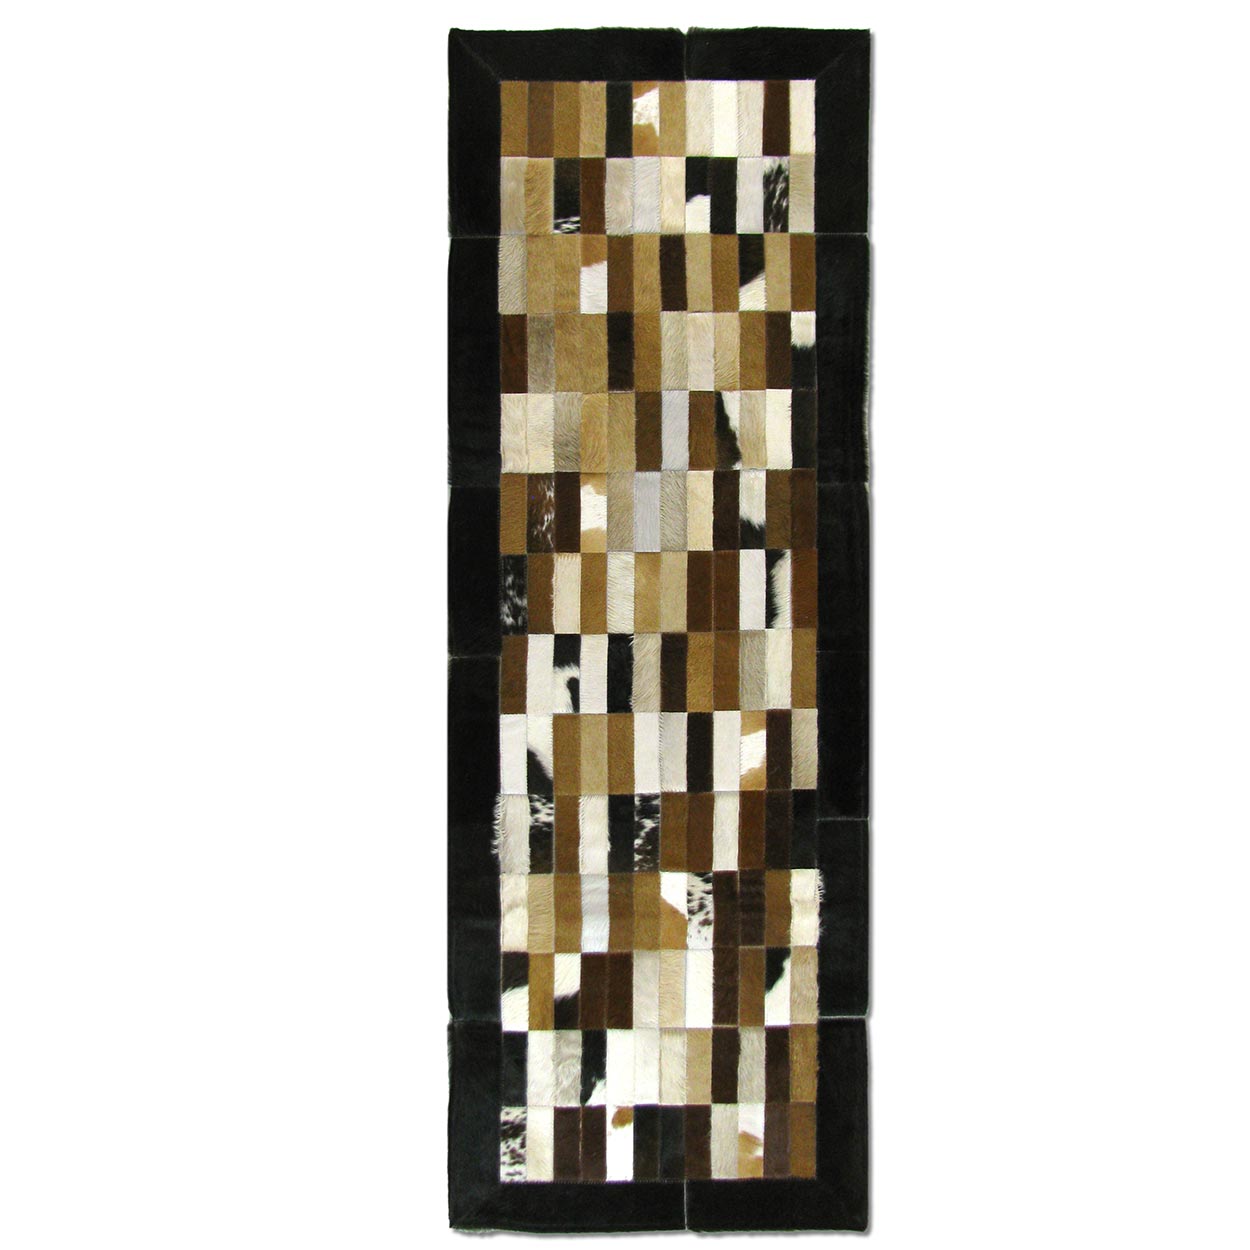 323170R-14459 - 71in x 26in Cowhide Patchwork Runner - Multi Brown And White